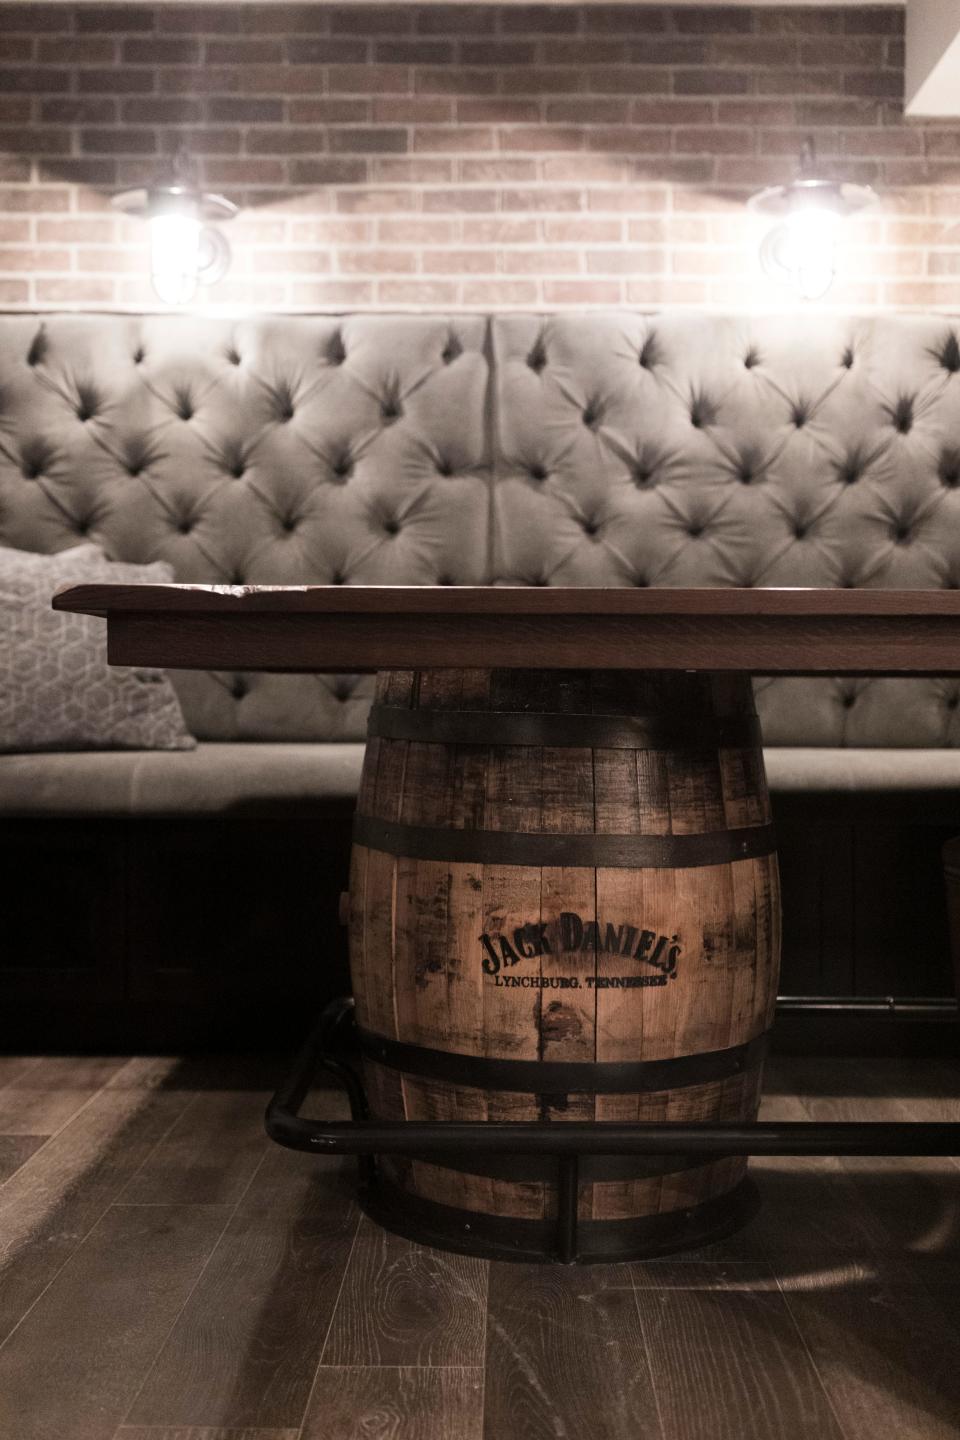 A Prohibition-inspired whiskey barrel was used in a basement speak-easy remodel in Hudson, Ohio.